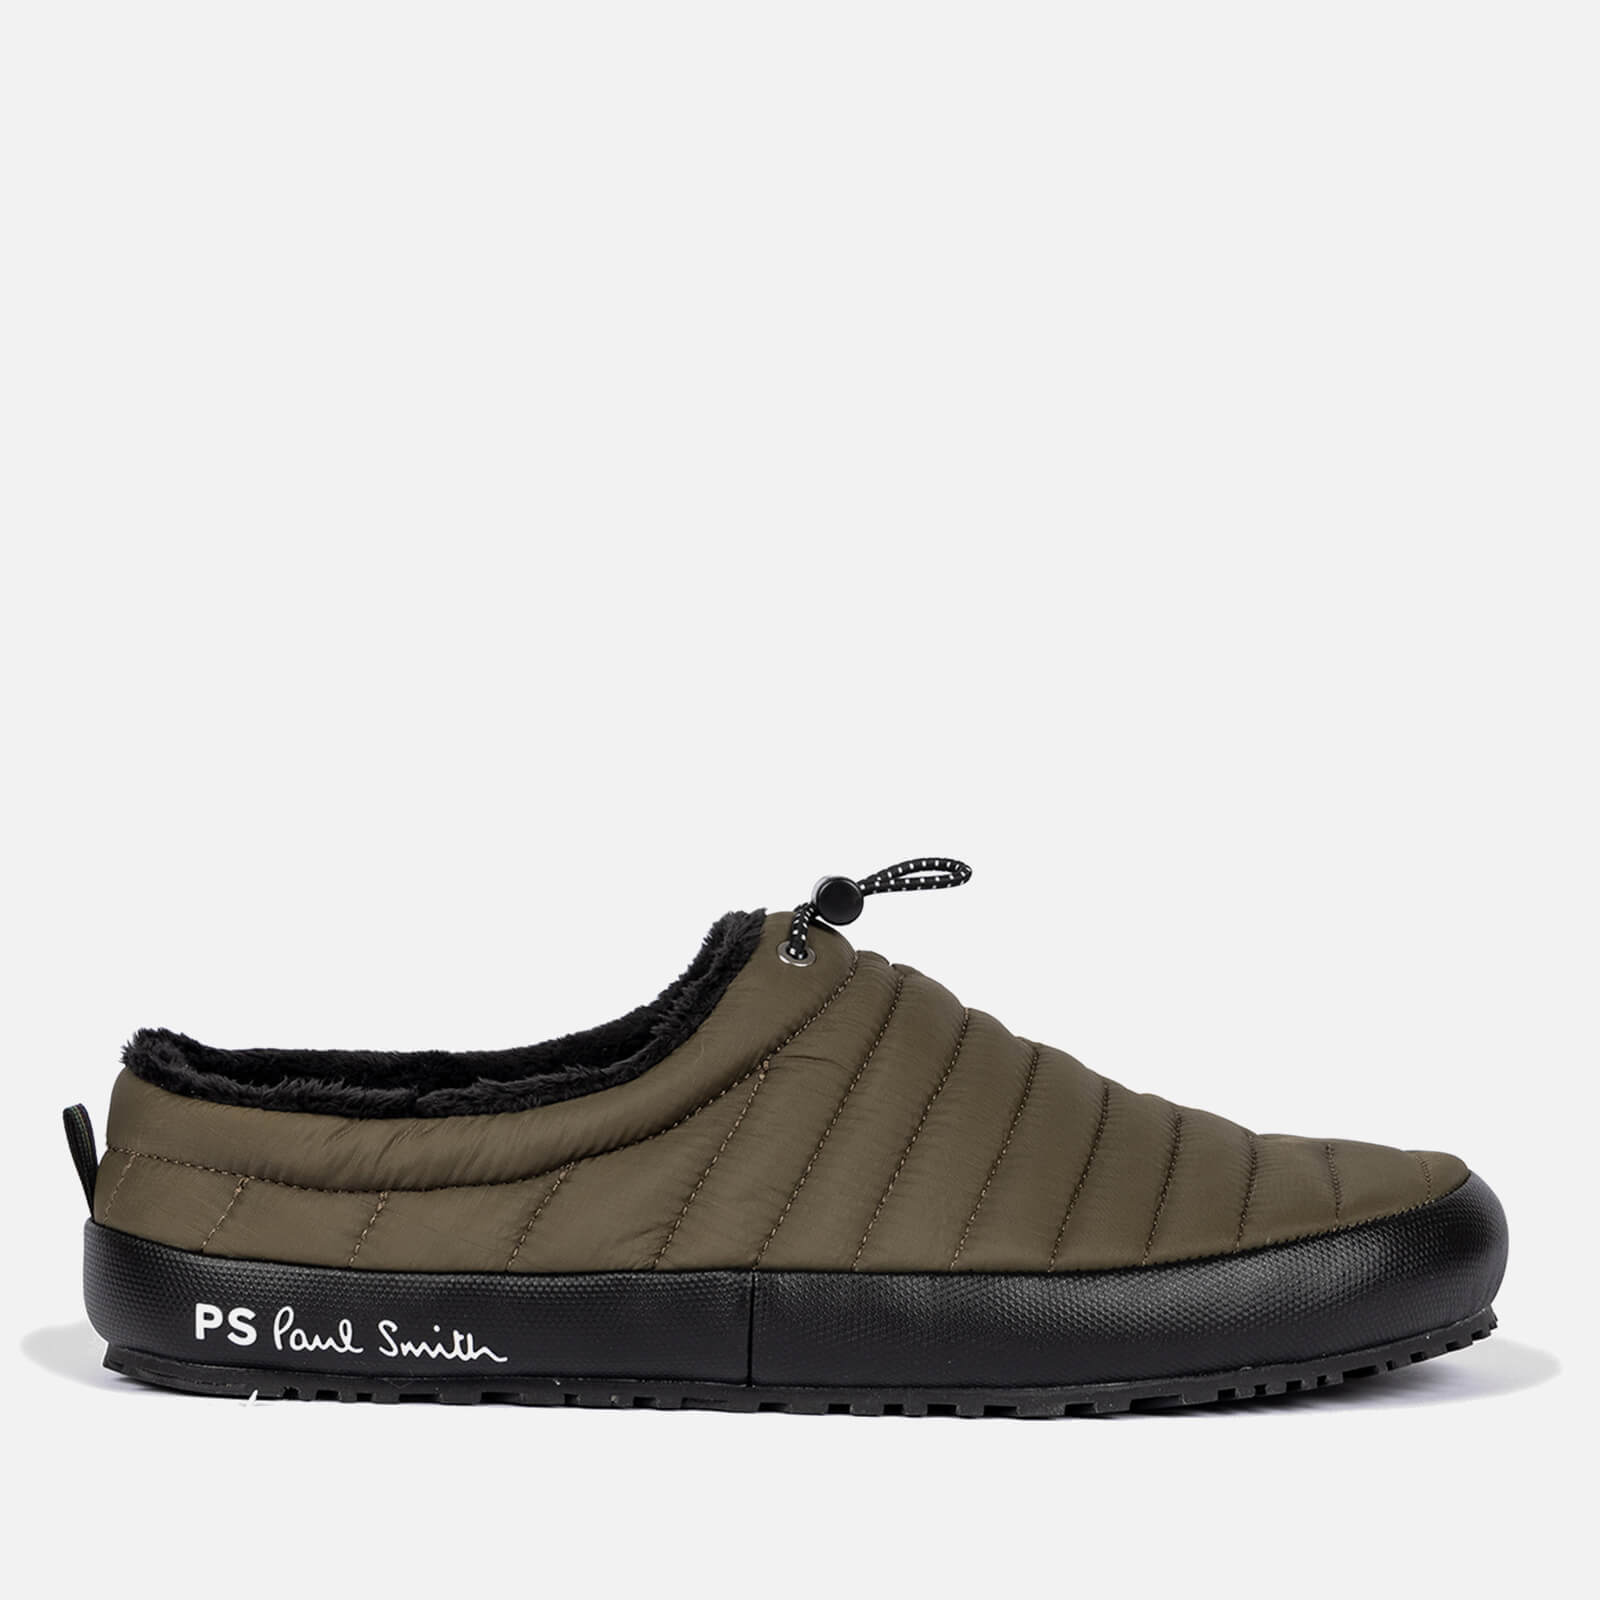 ps paul smith men's larsen quilted shell mules - uk 7